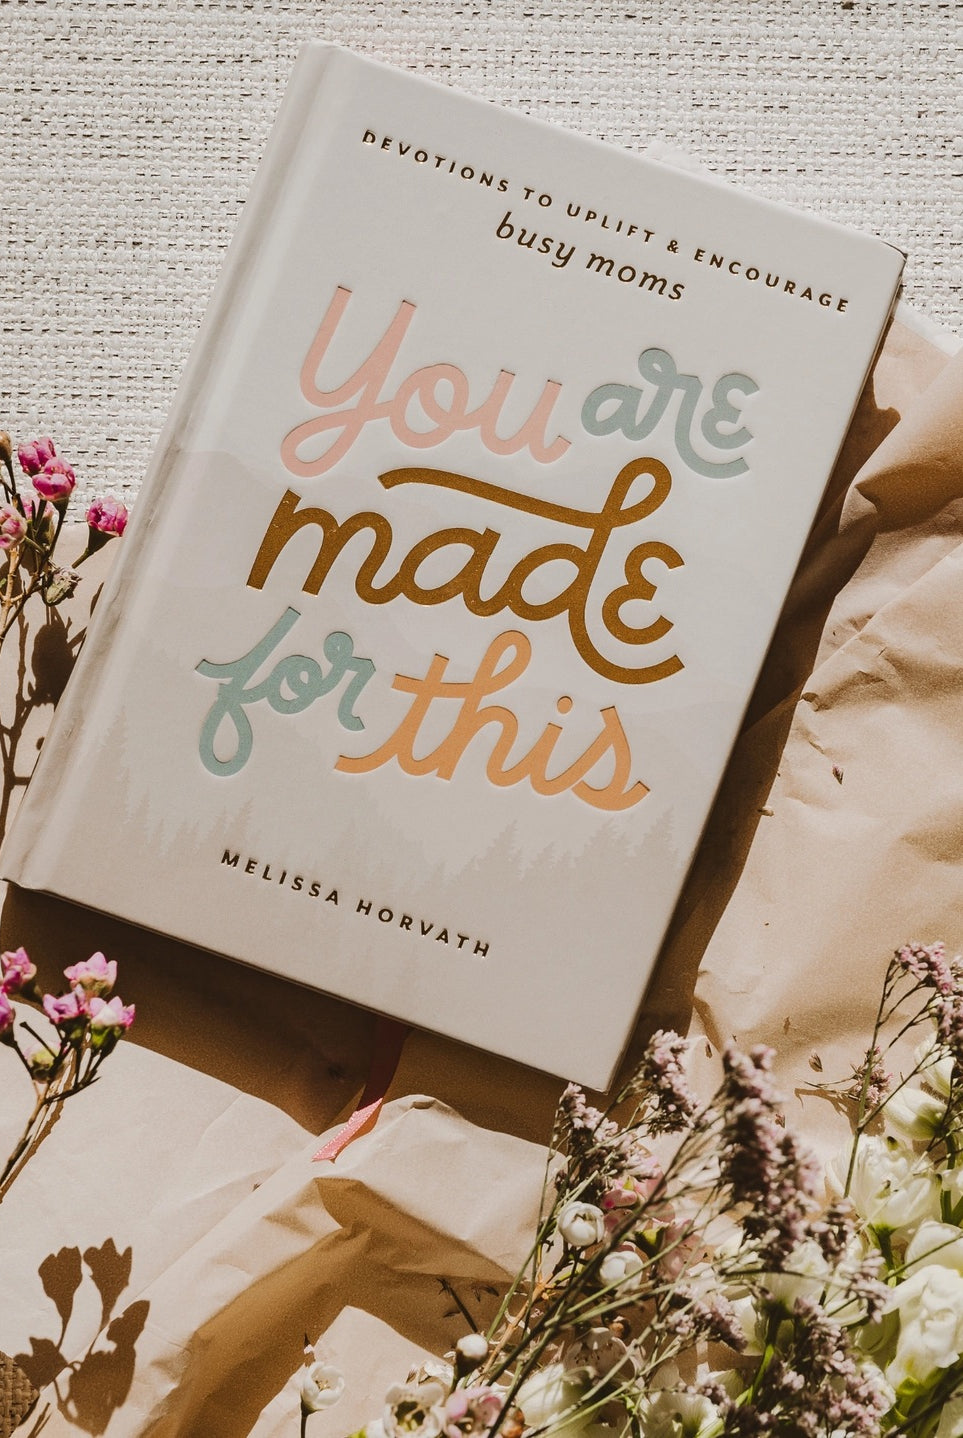 You are Made for This - A Devotional For Busy Moms-The Lovely Closet-The Lovely Closet, Women's Fashion Boutique in Alexandria, KY